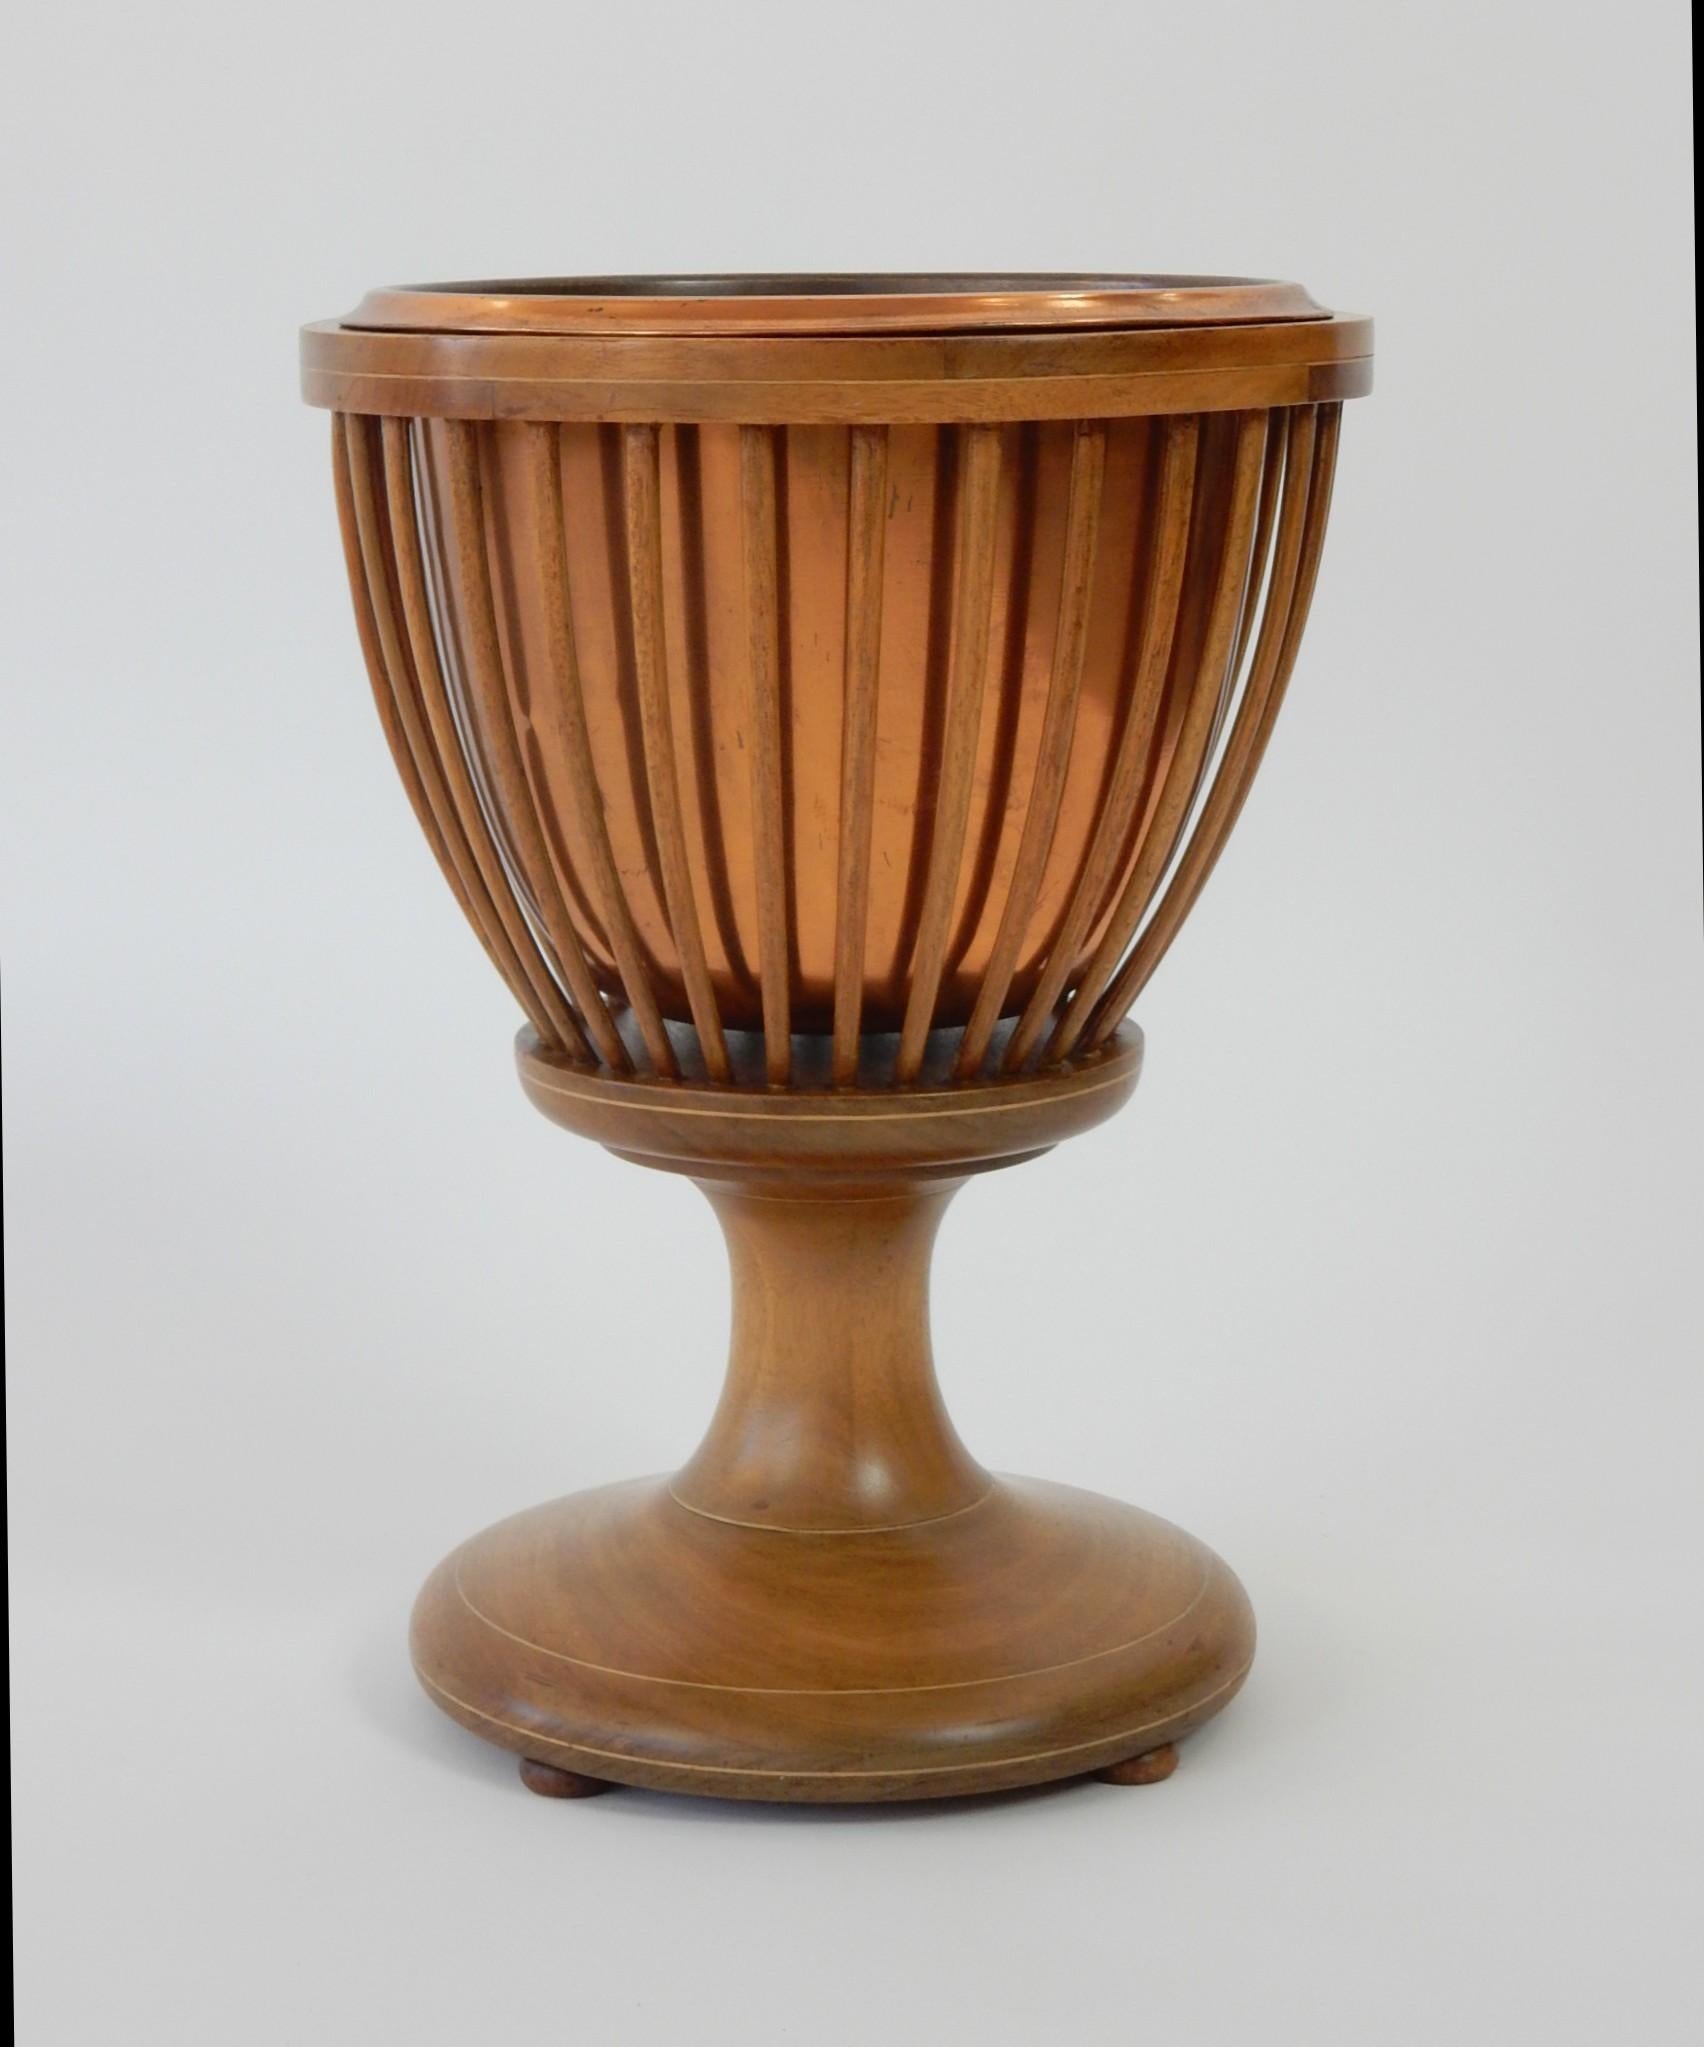 19th Century Slatted Inlaid Mahogany and Copper Jardinièr Planter For Sale 5